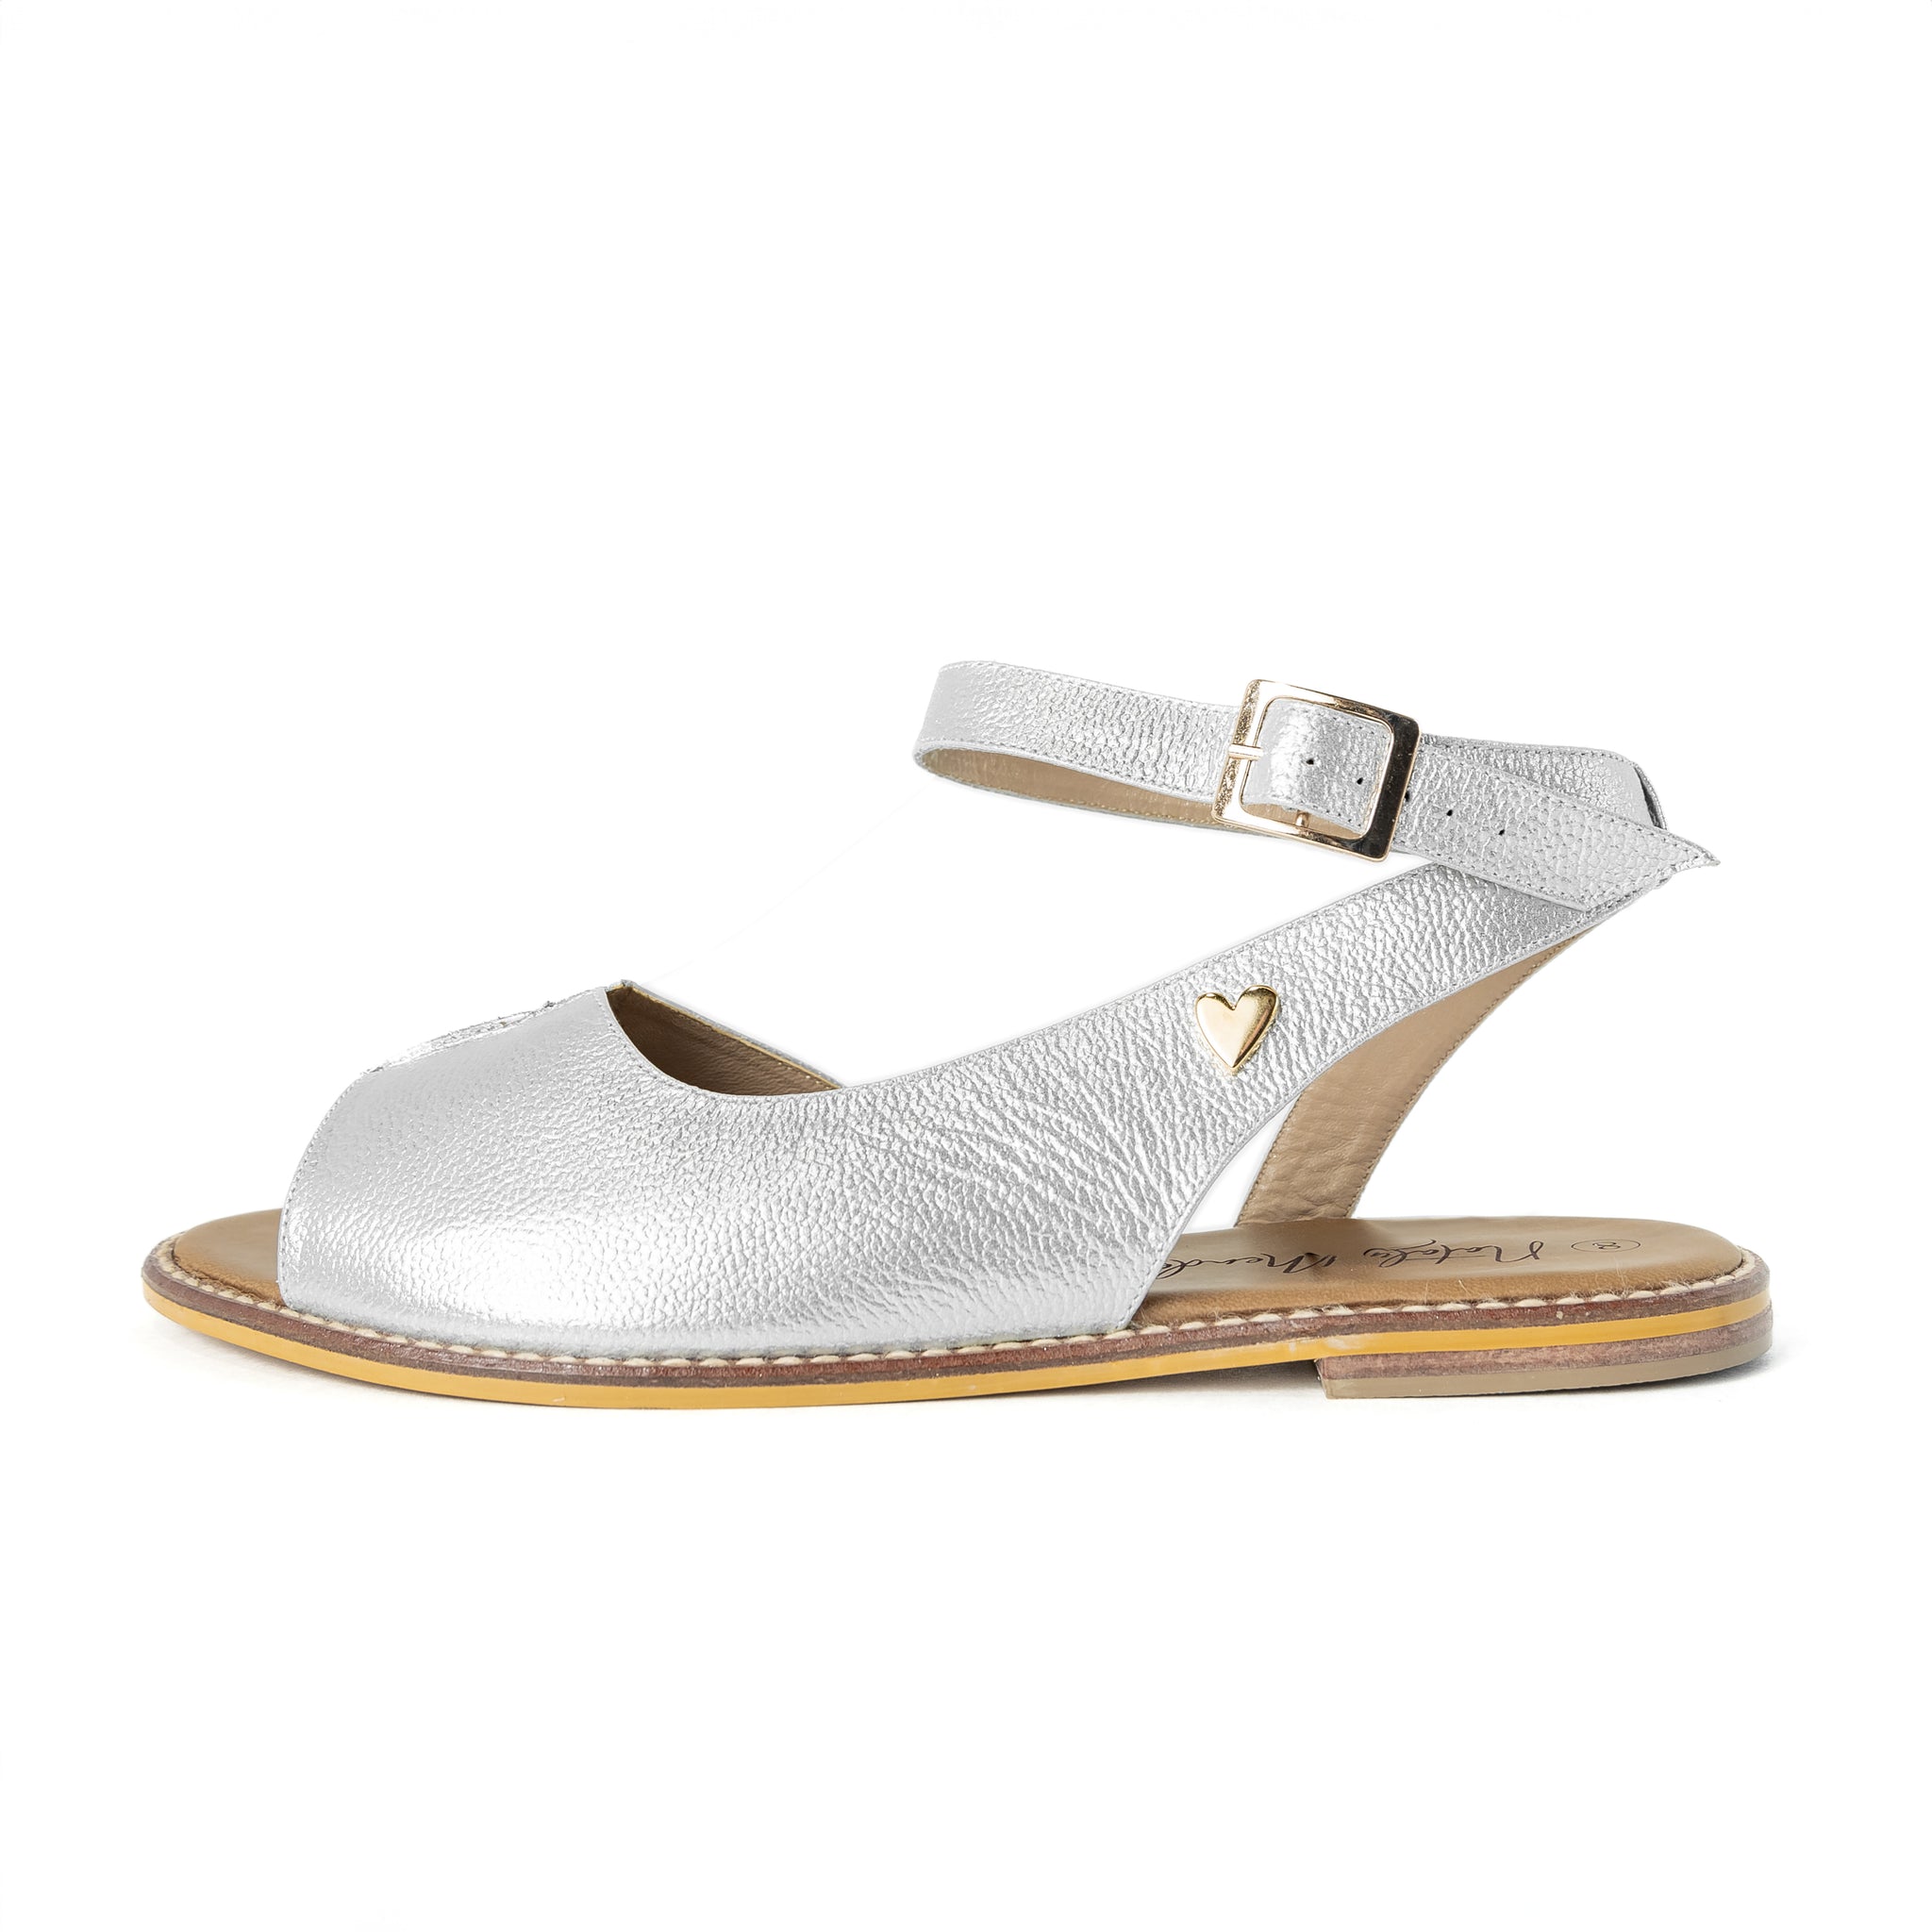 Jess Flat Sandals - Silver by Nataly Mendez, Genuine leather; Insole lining made of leather Italian, Heel height .5 cm Handmade